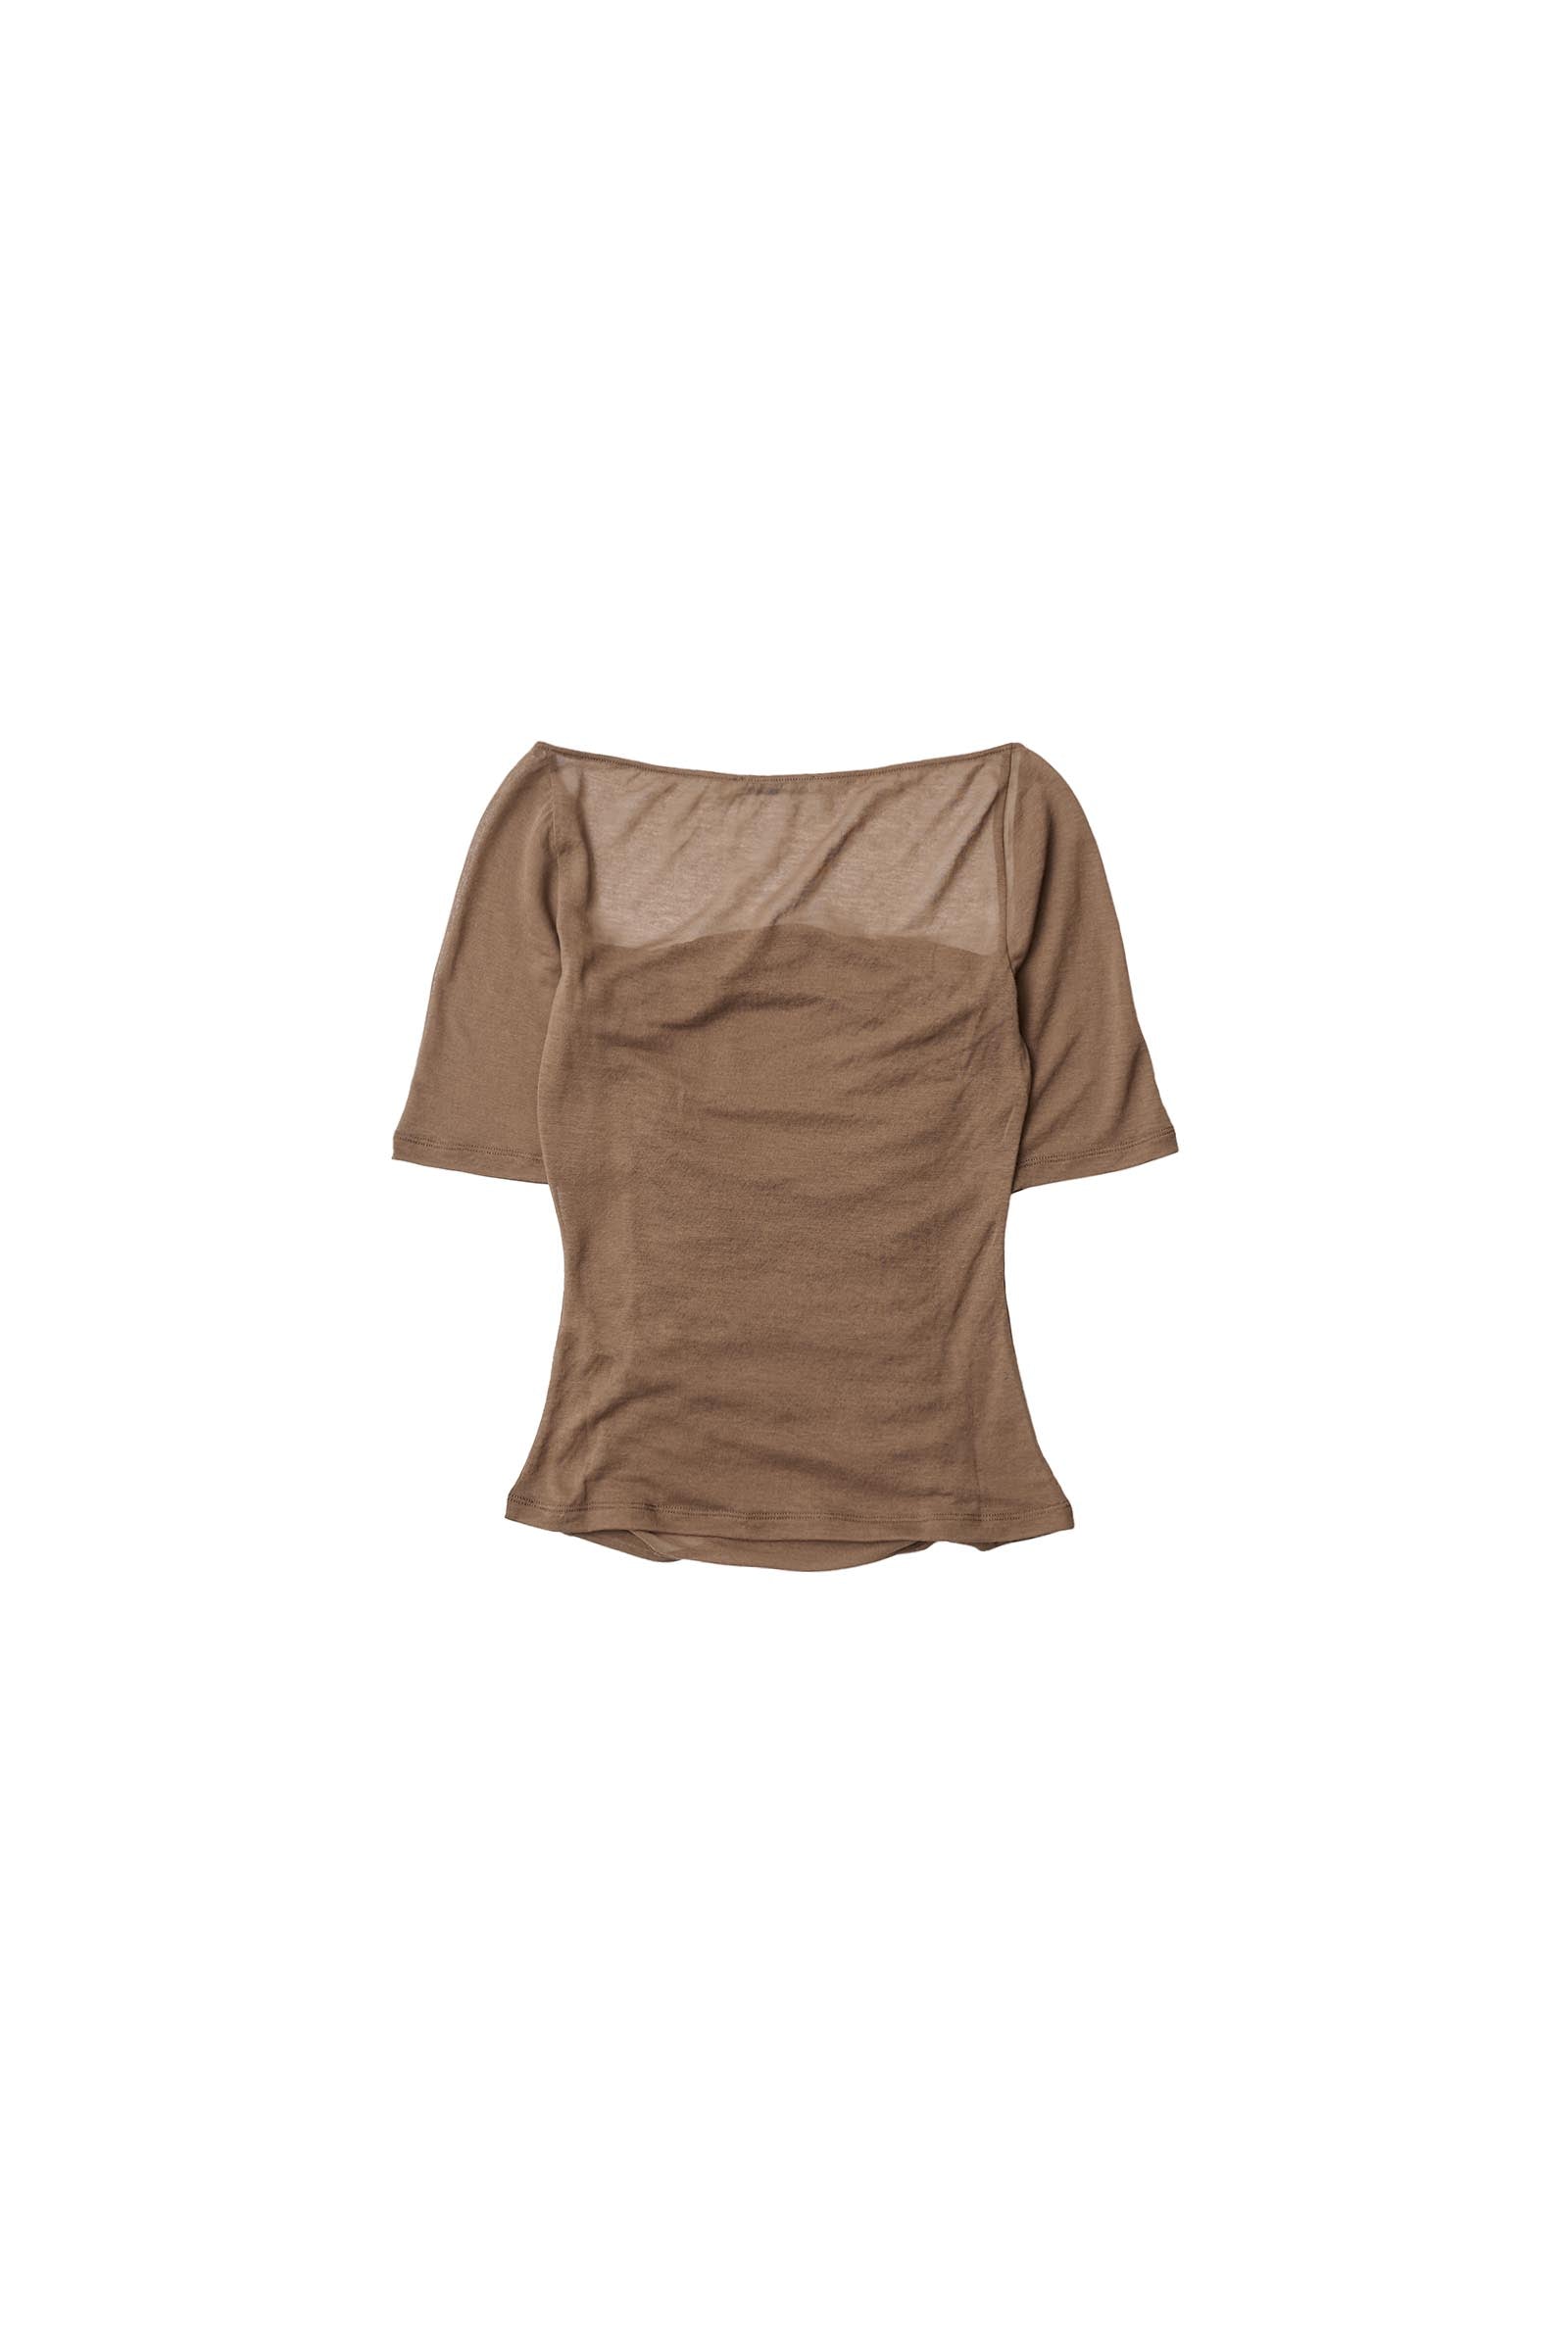 PALOMA WOOL / Pixy -slightly sheer top with frontal gathering